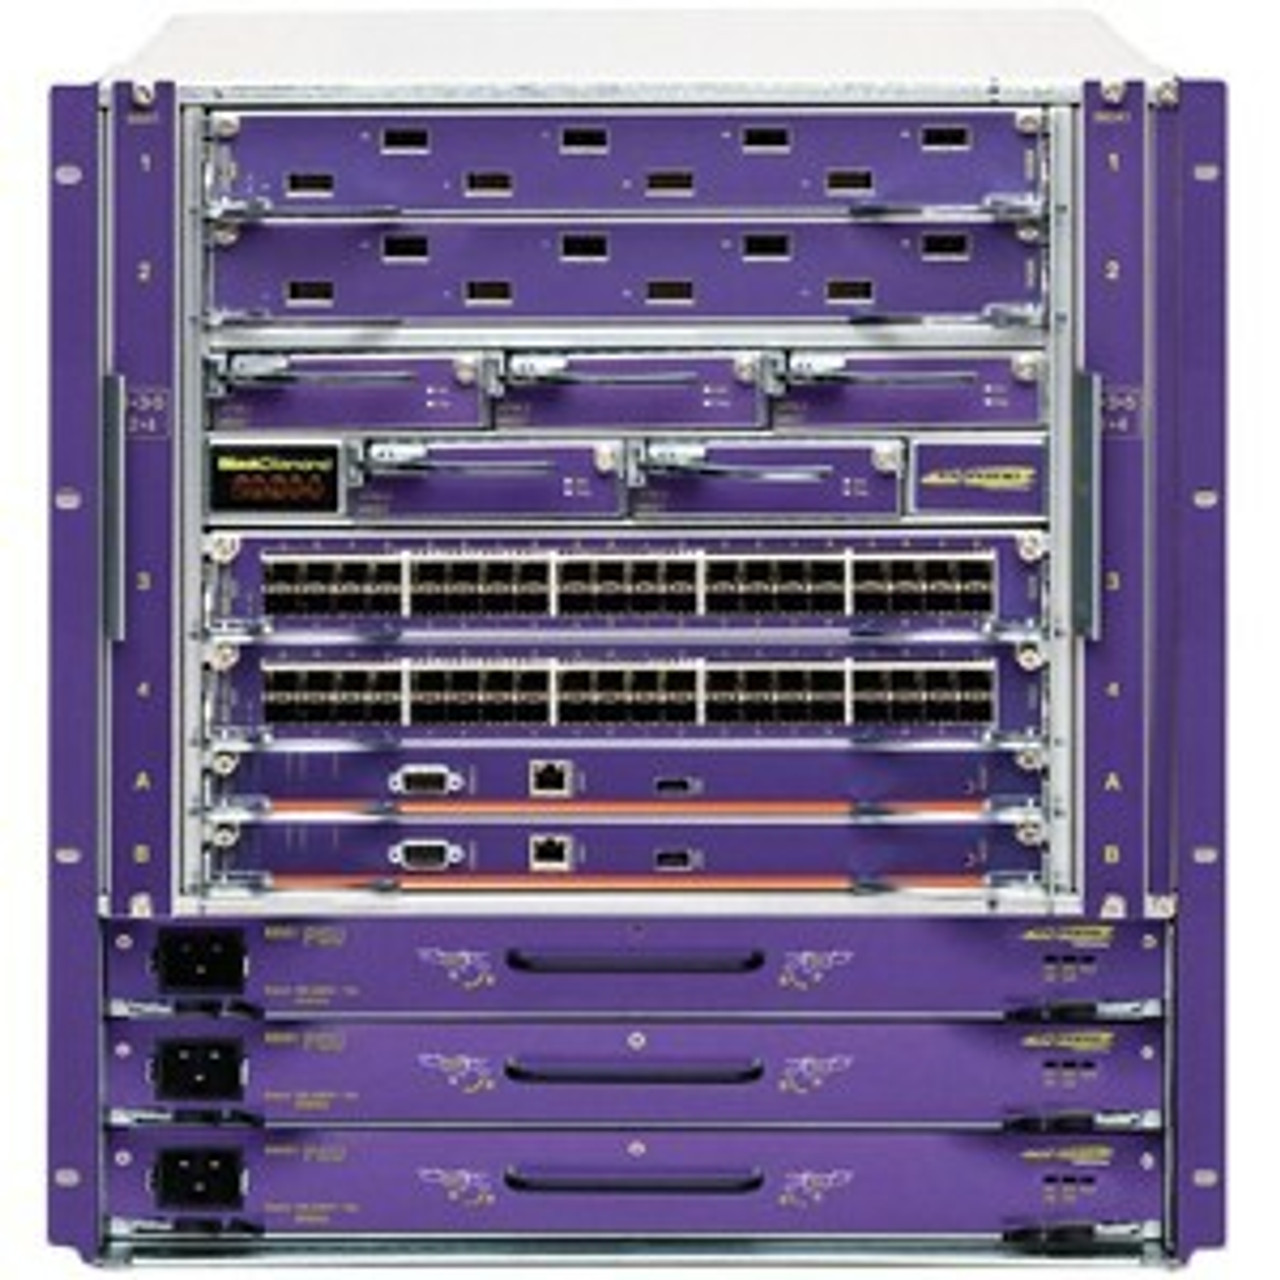 68040 Extreme Networks BlackDiamond 20804 Switch Chassis - Manageable - 3 Layer Supported - 11U High - Rack-mountable - 1 Year Limited  (Refurbished)